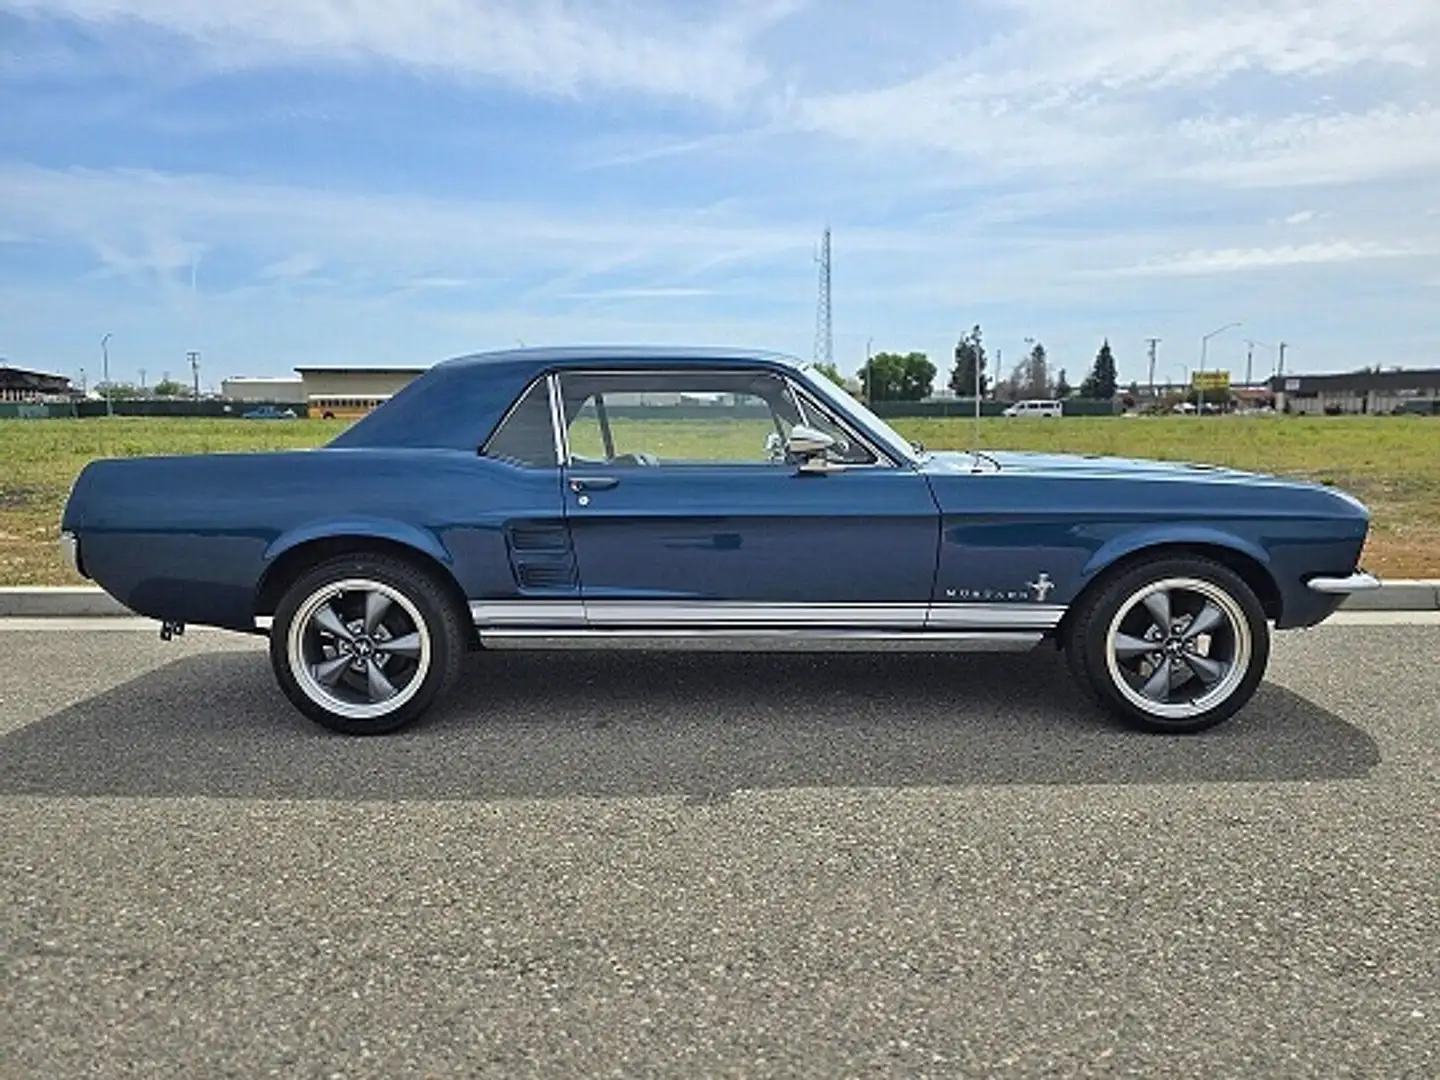 Ford Mustang RESTOMOD COUPE ACAPULCO BLUE 302 V8 - 2